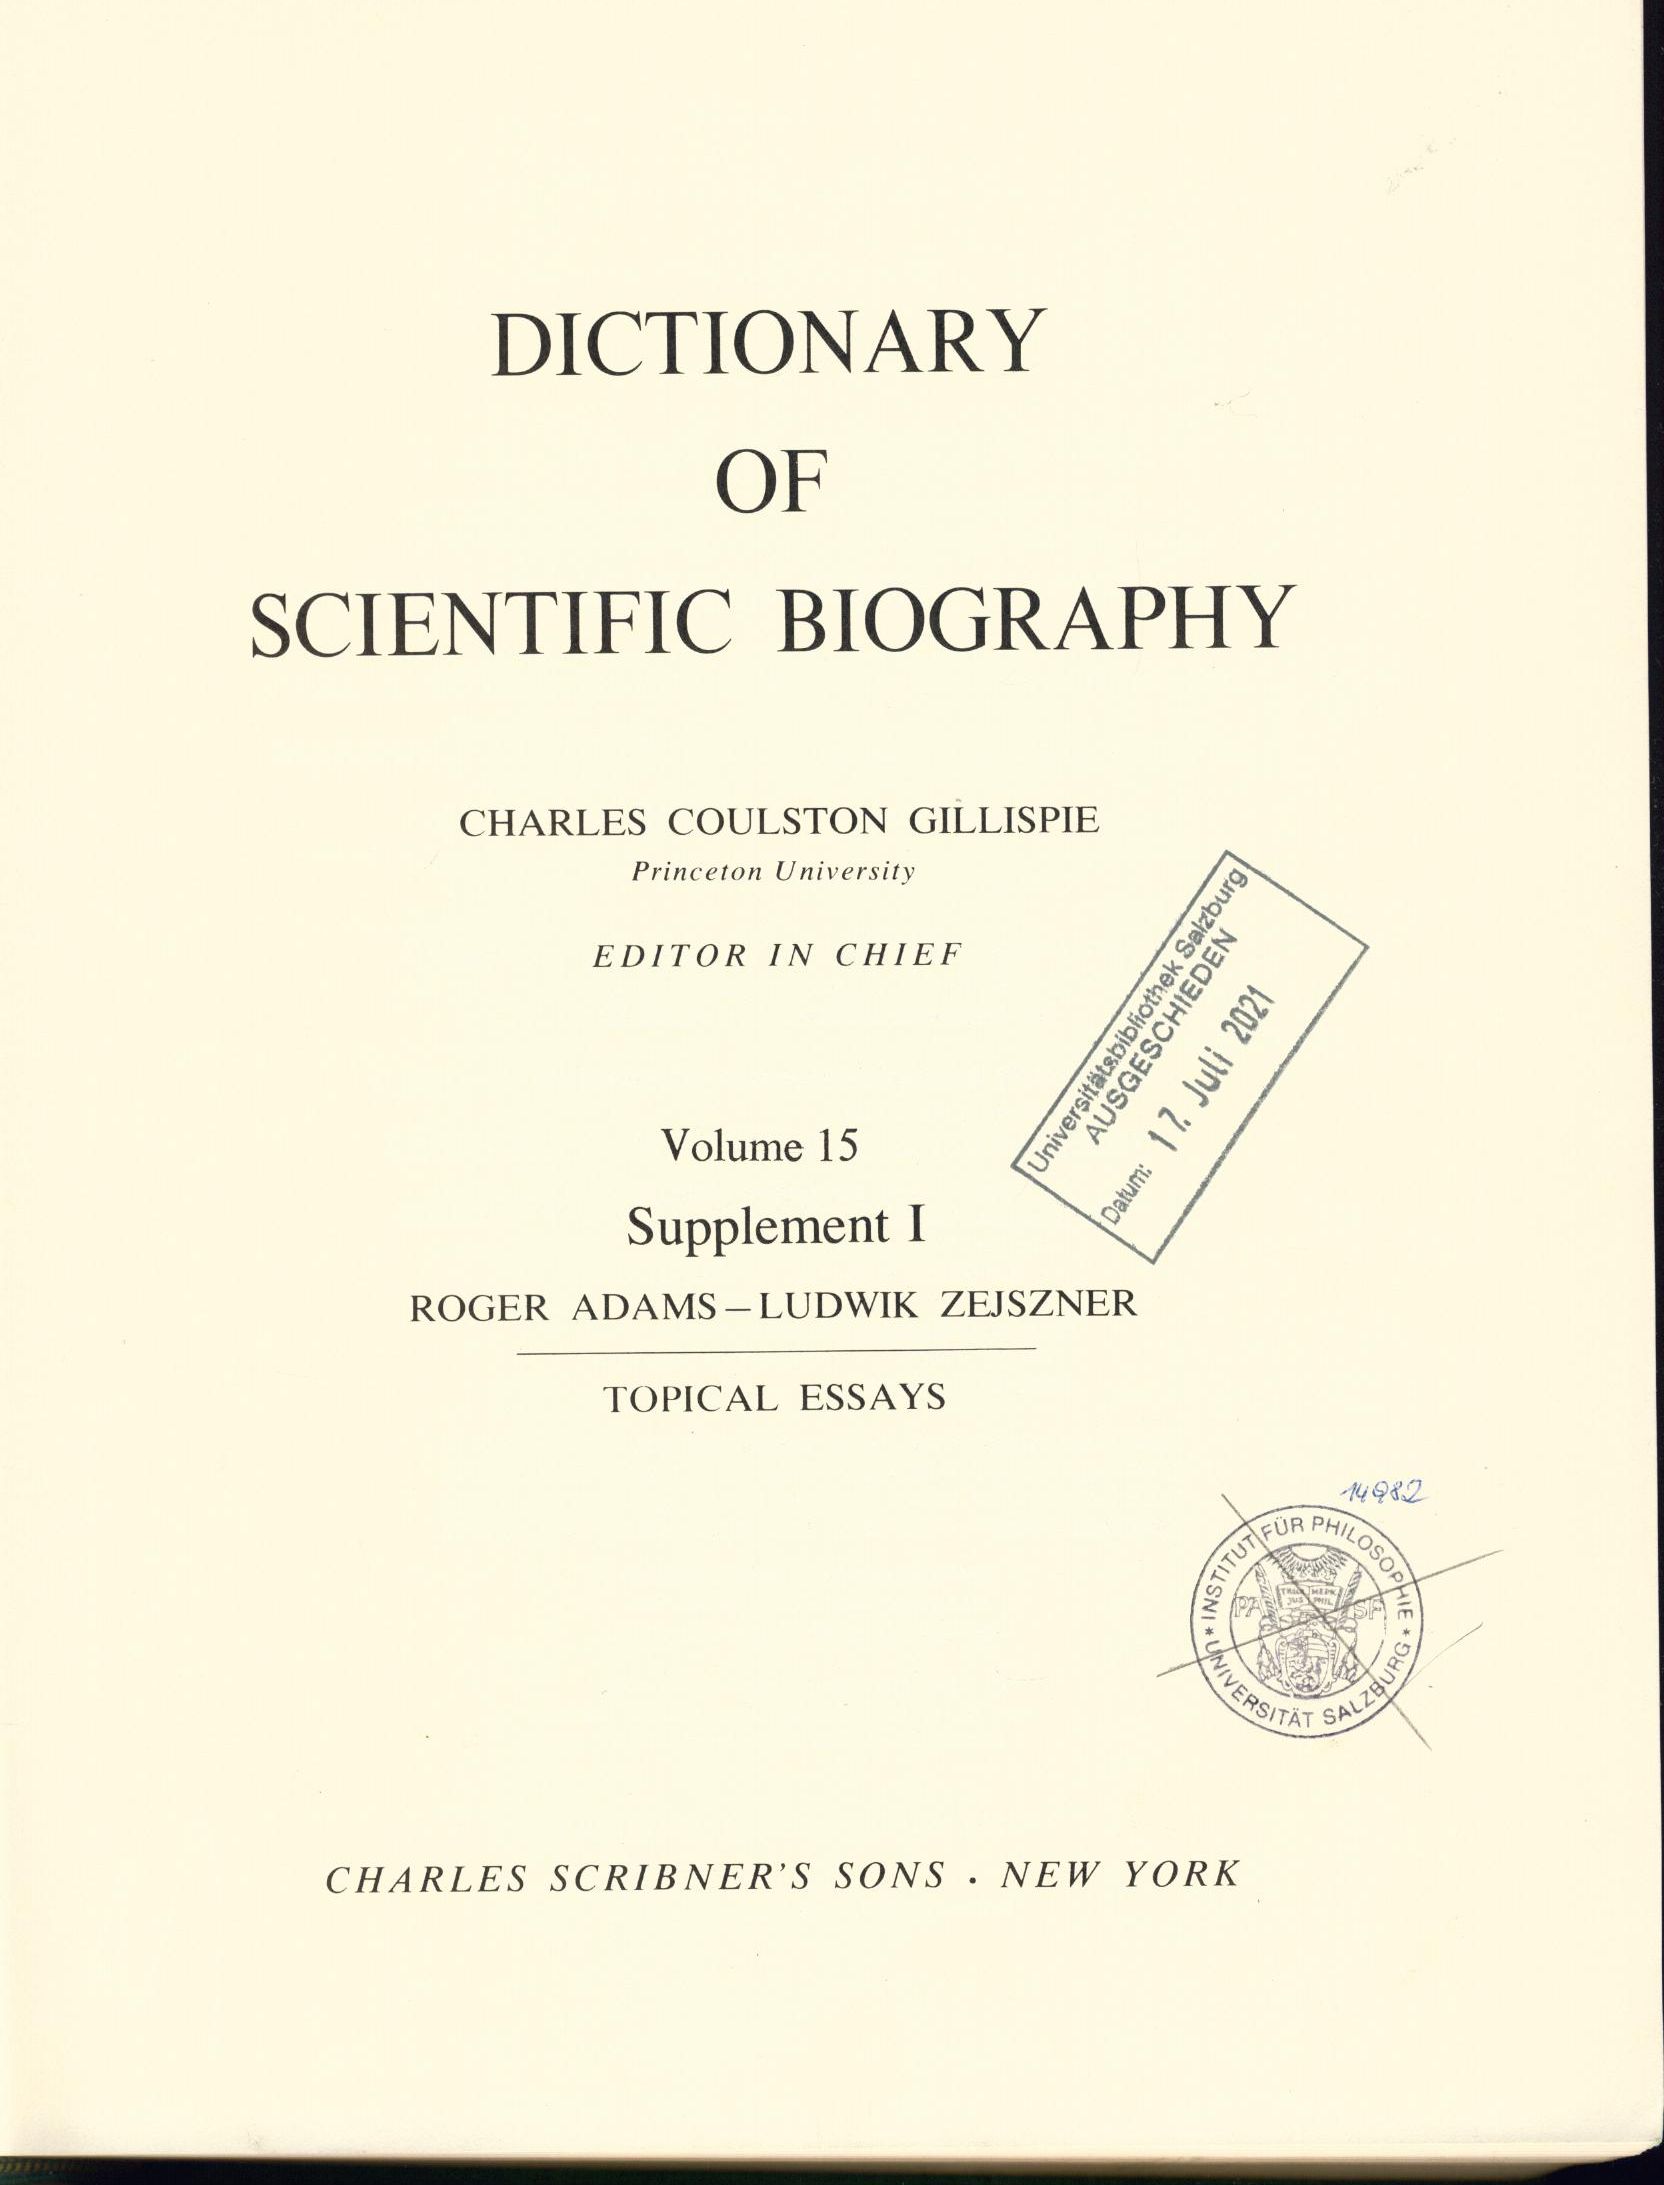 Dictionary of Scientific Biography Volume 15 + 16, Supplement I - Gillispie, Charles Coulston